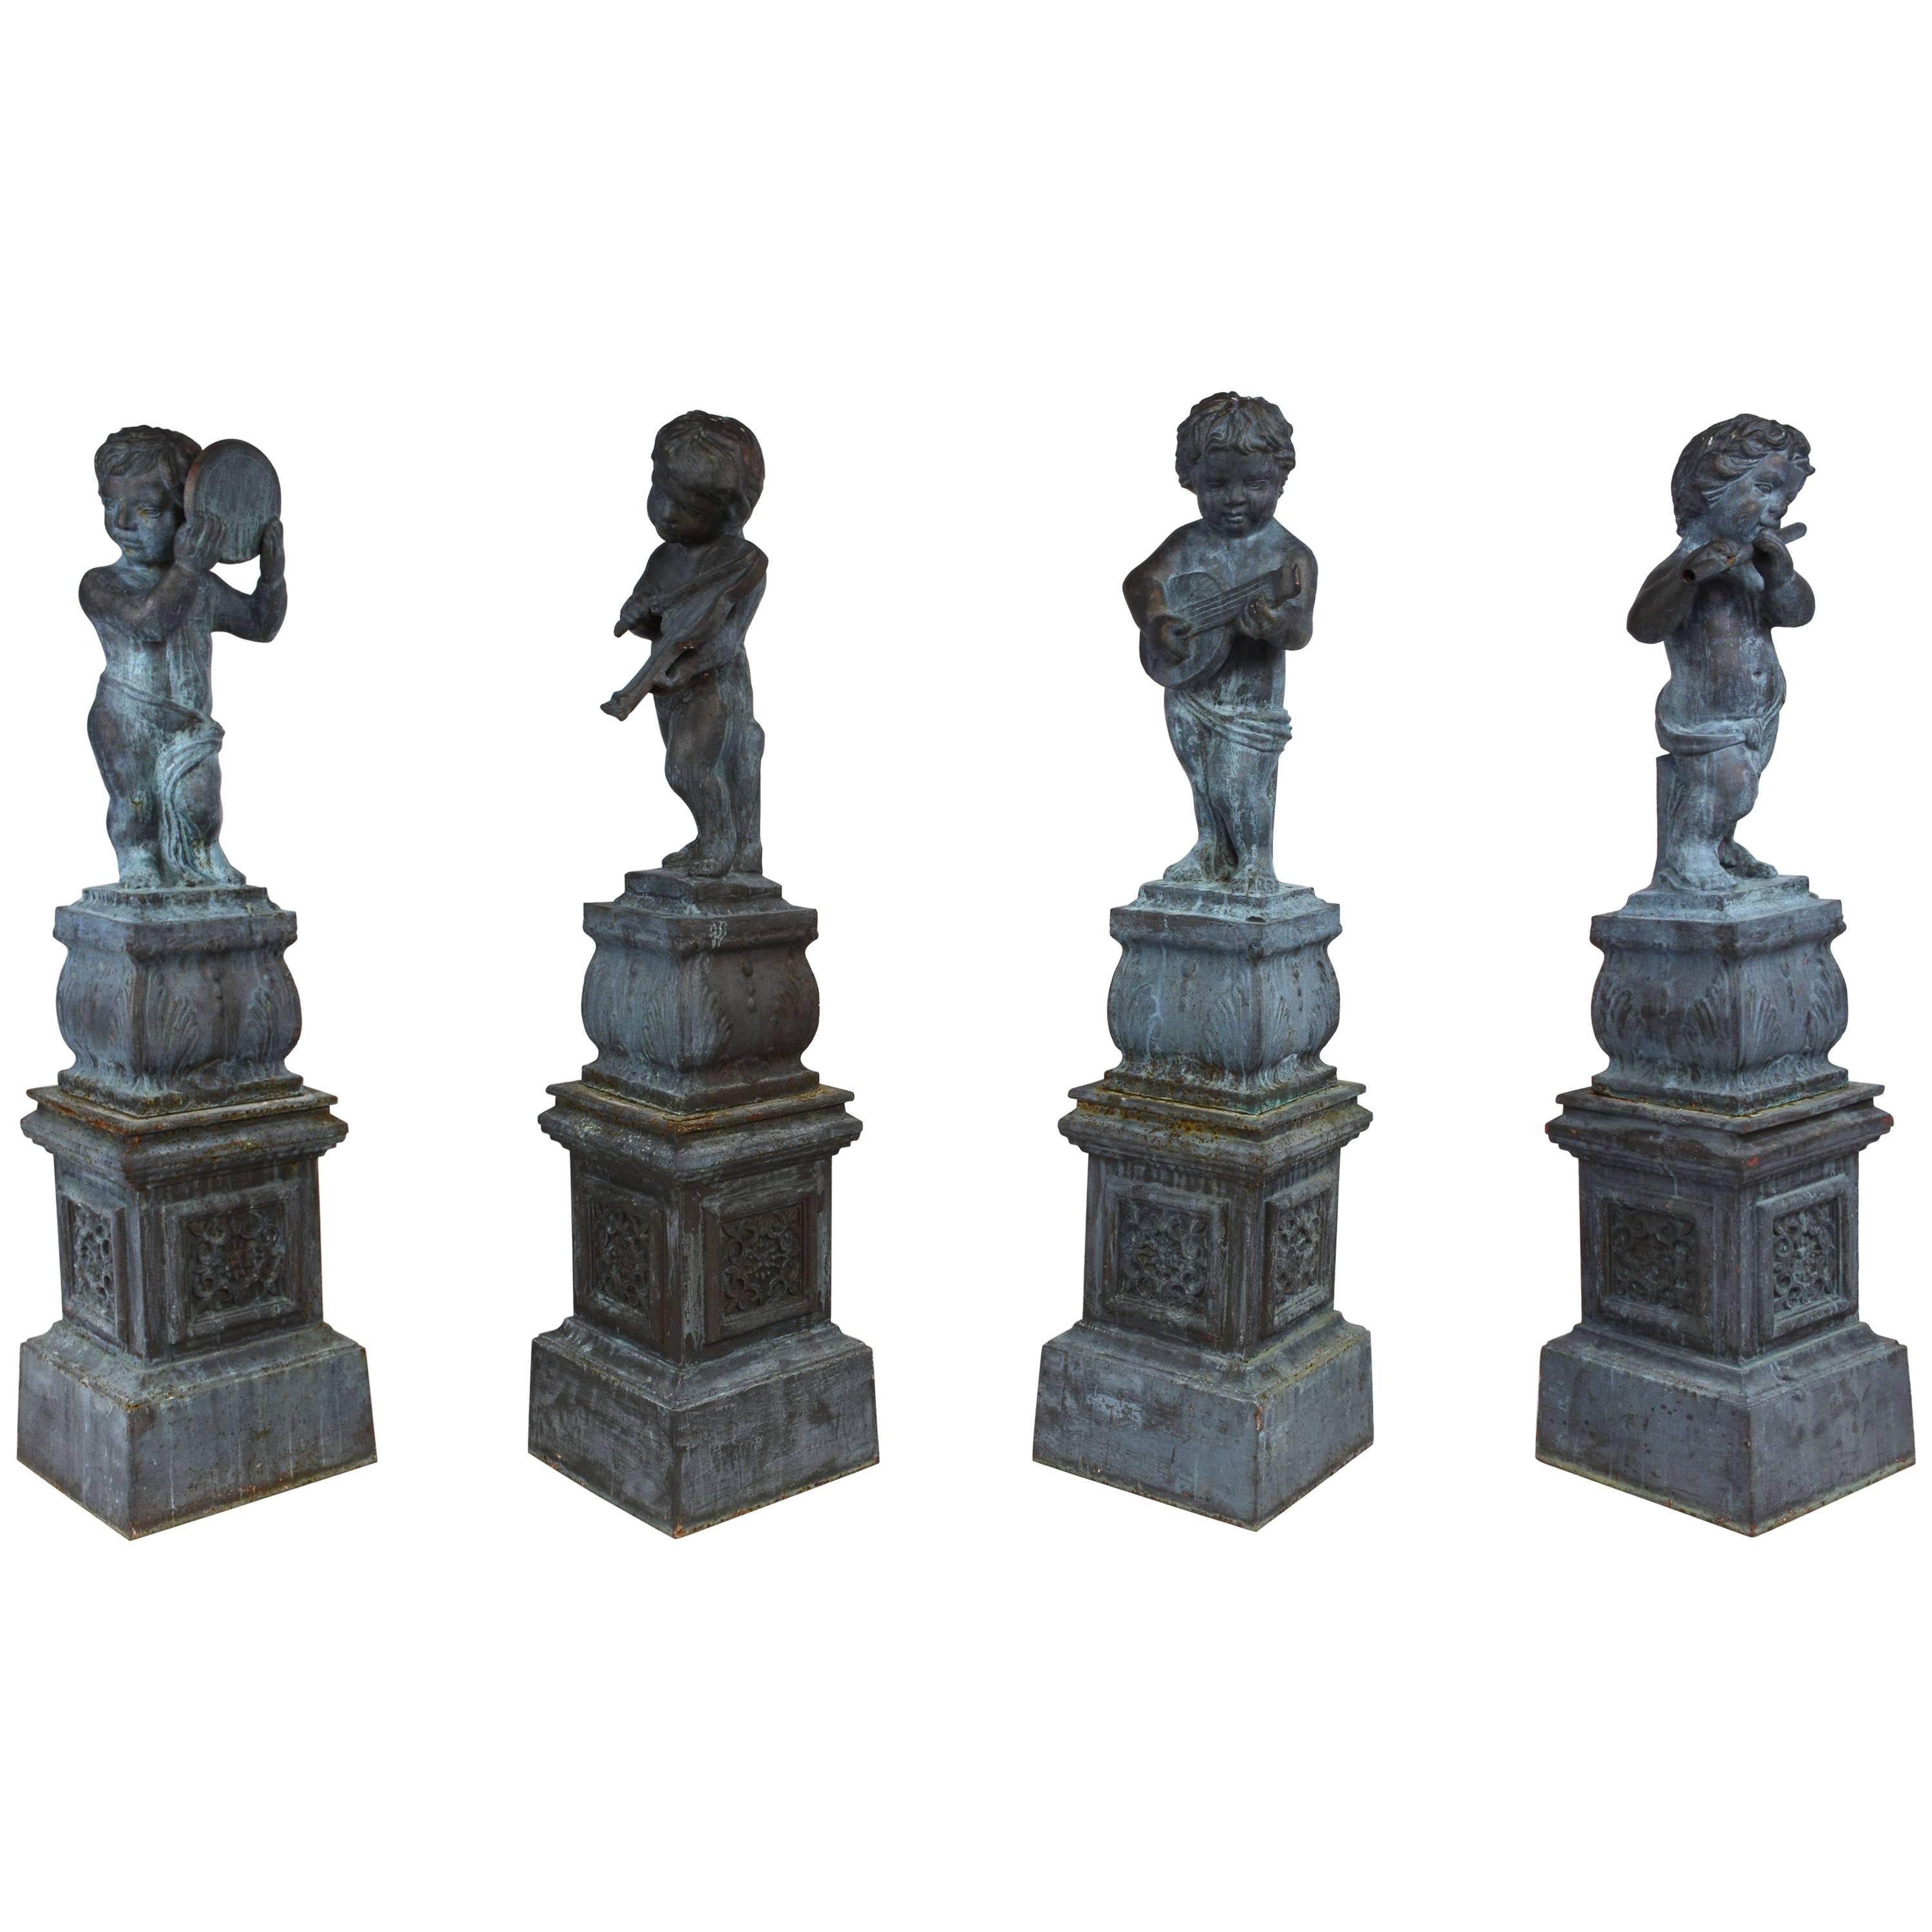 Set of Four Neoclassical-Style Cast Iron Garden Statues